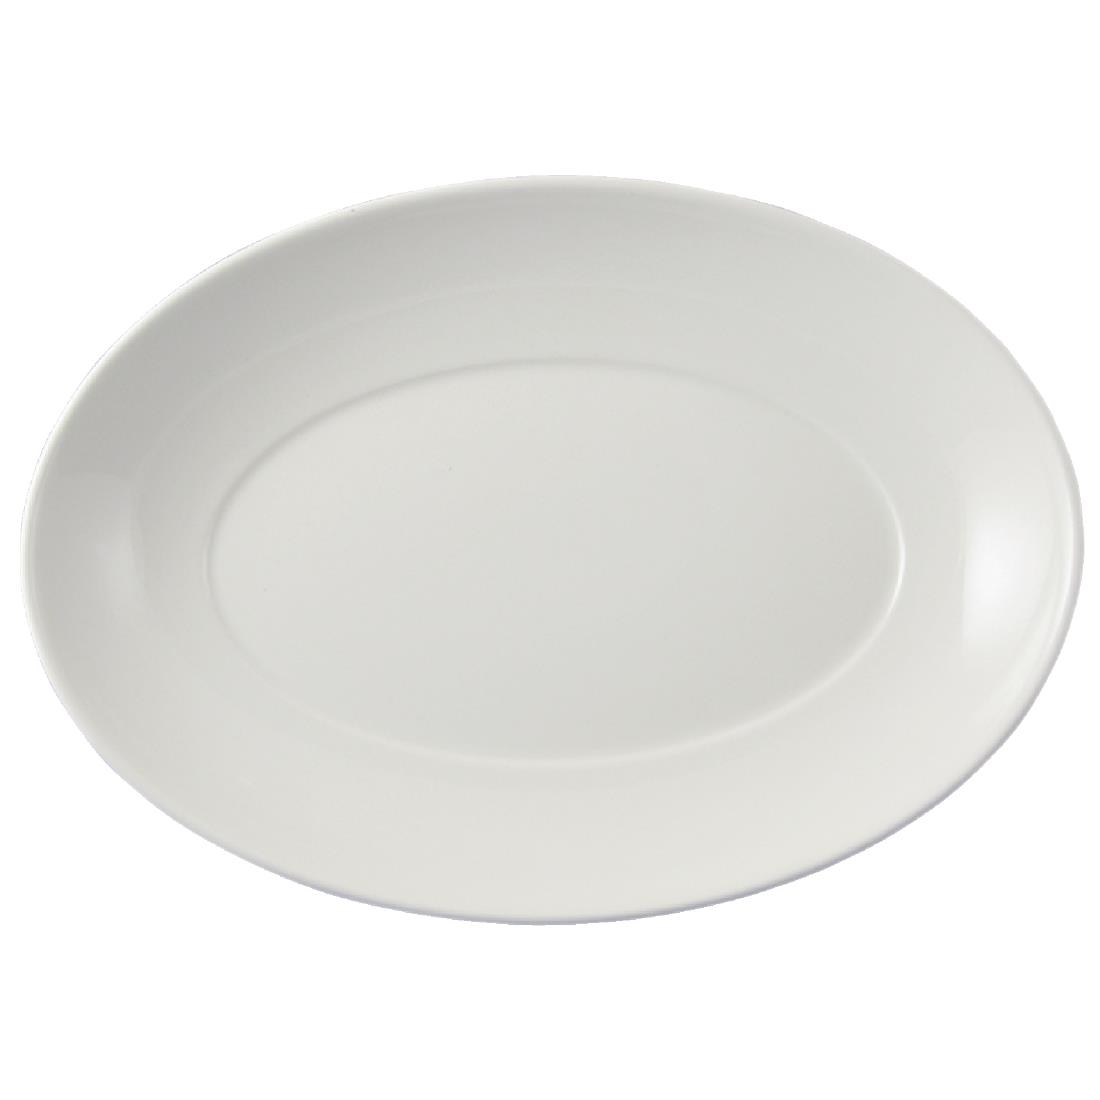 Dudson Flair Deep Oval Plates 318mm (Pack of 12)